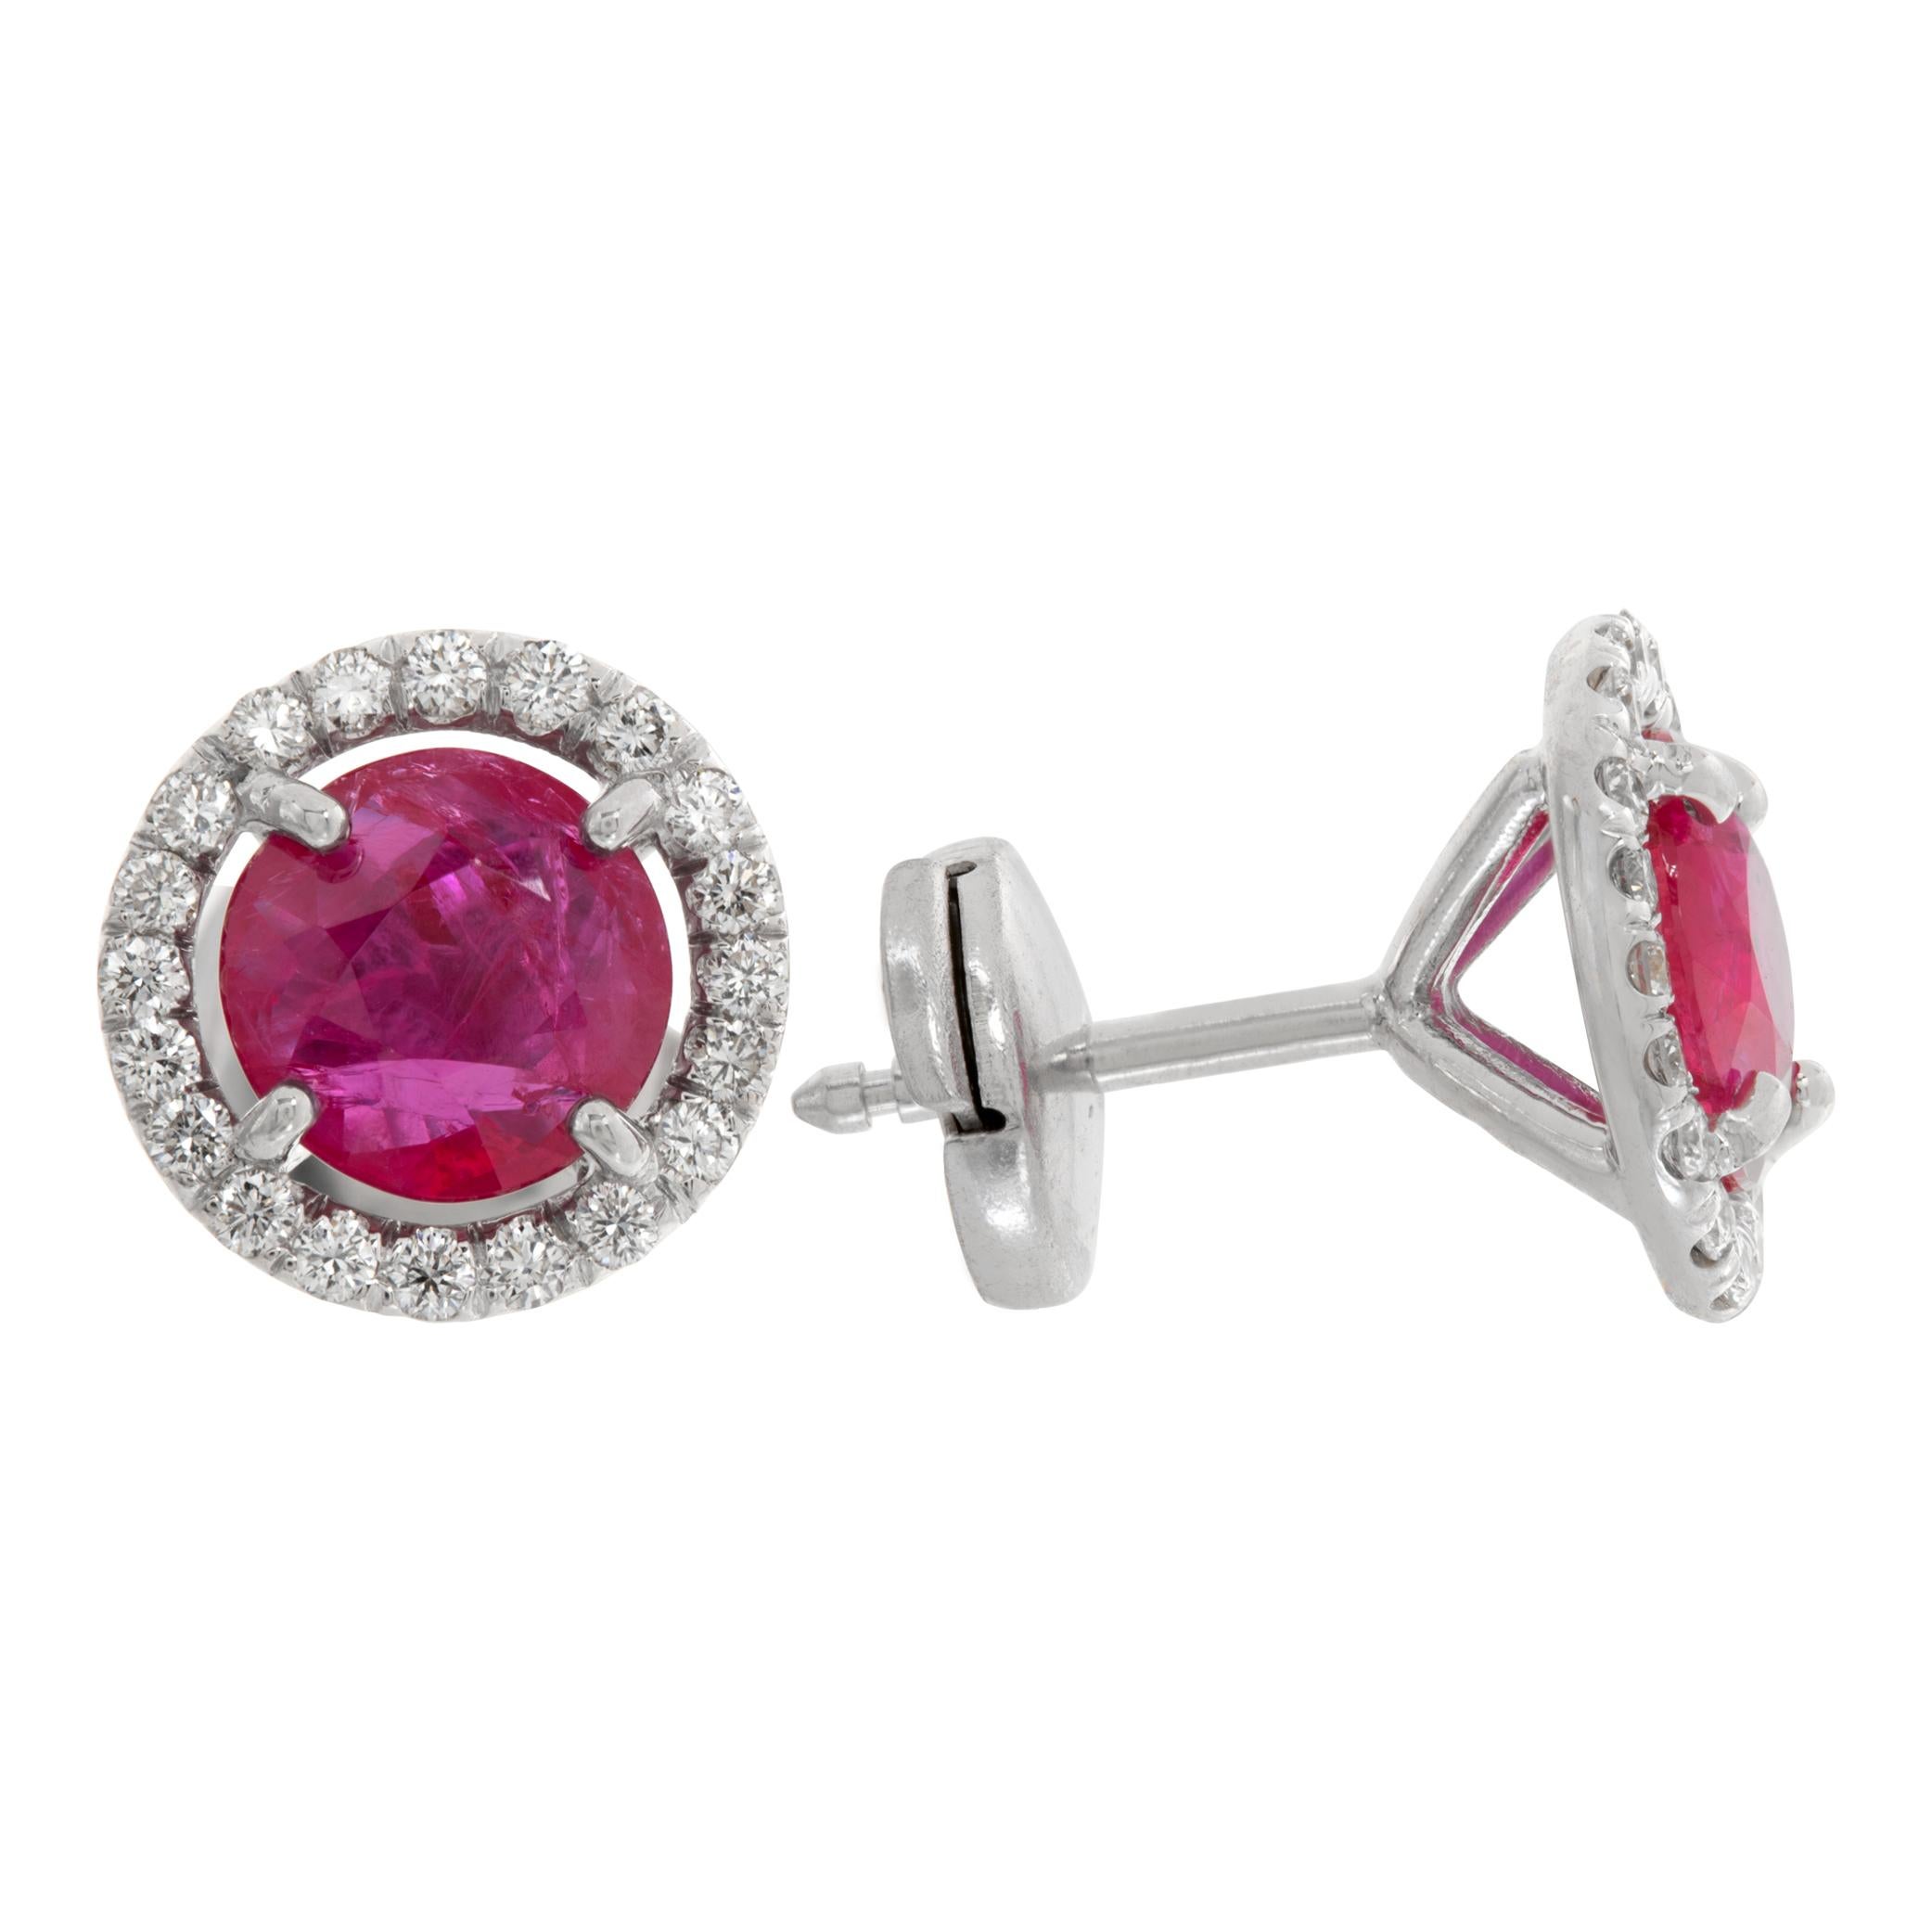 Rubies & diamonds 18K white gold stud earring In Excellent Condition For Sale In Surfside, FL